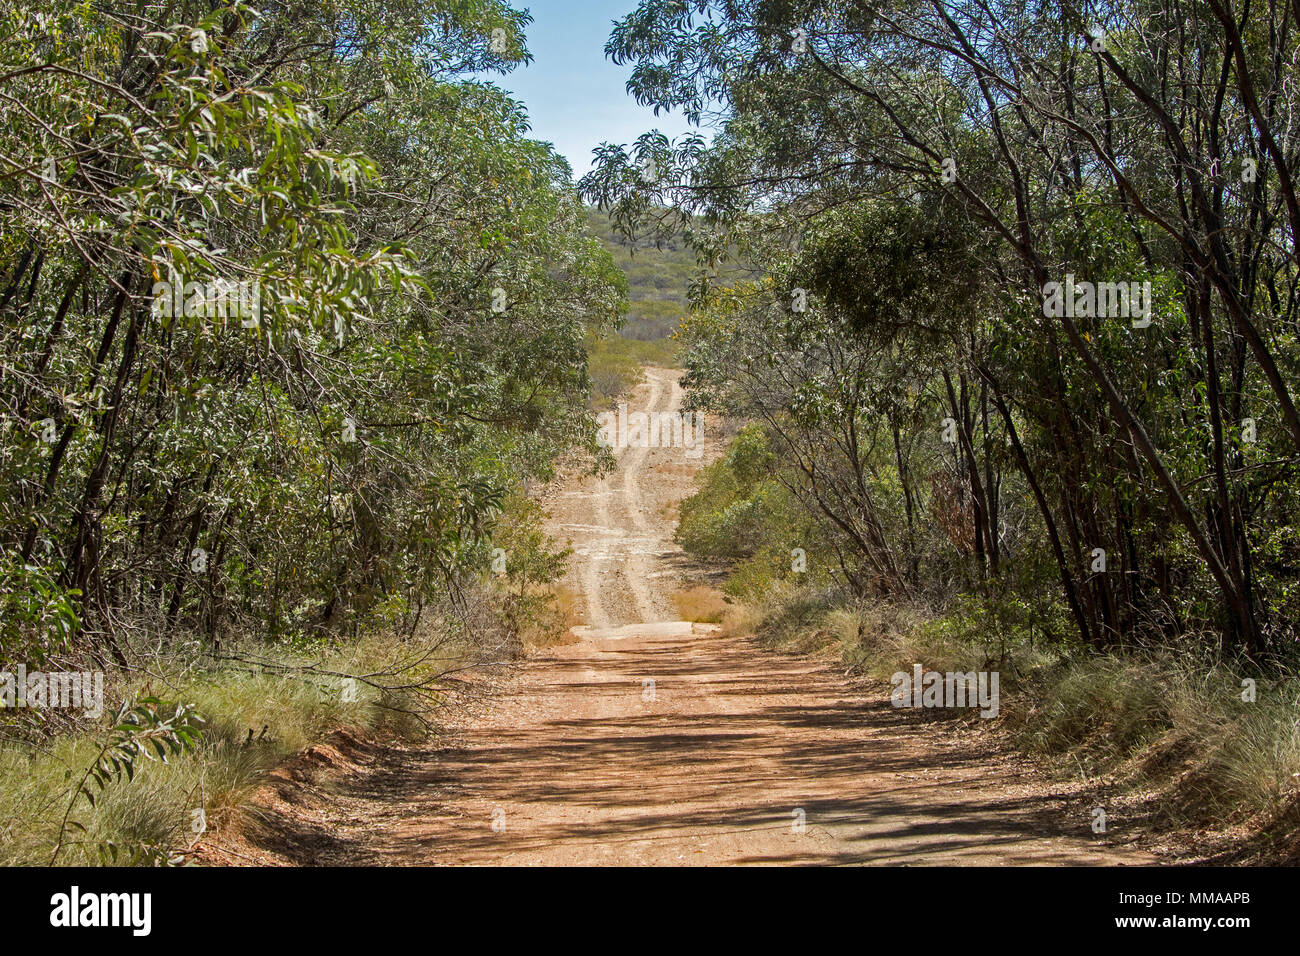 Landscape with woodlands of eucalyptus trees severed by narrow dirt road in Minerva Hills National Park, near Springsure, Queensland Australia Stock Photo